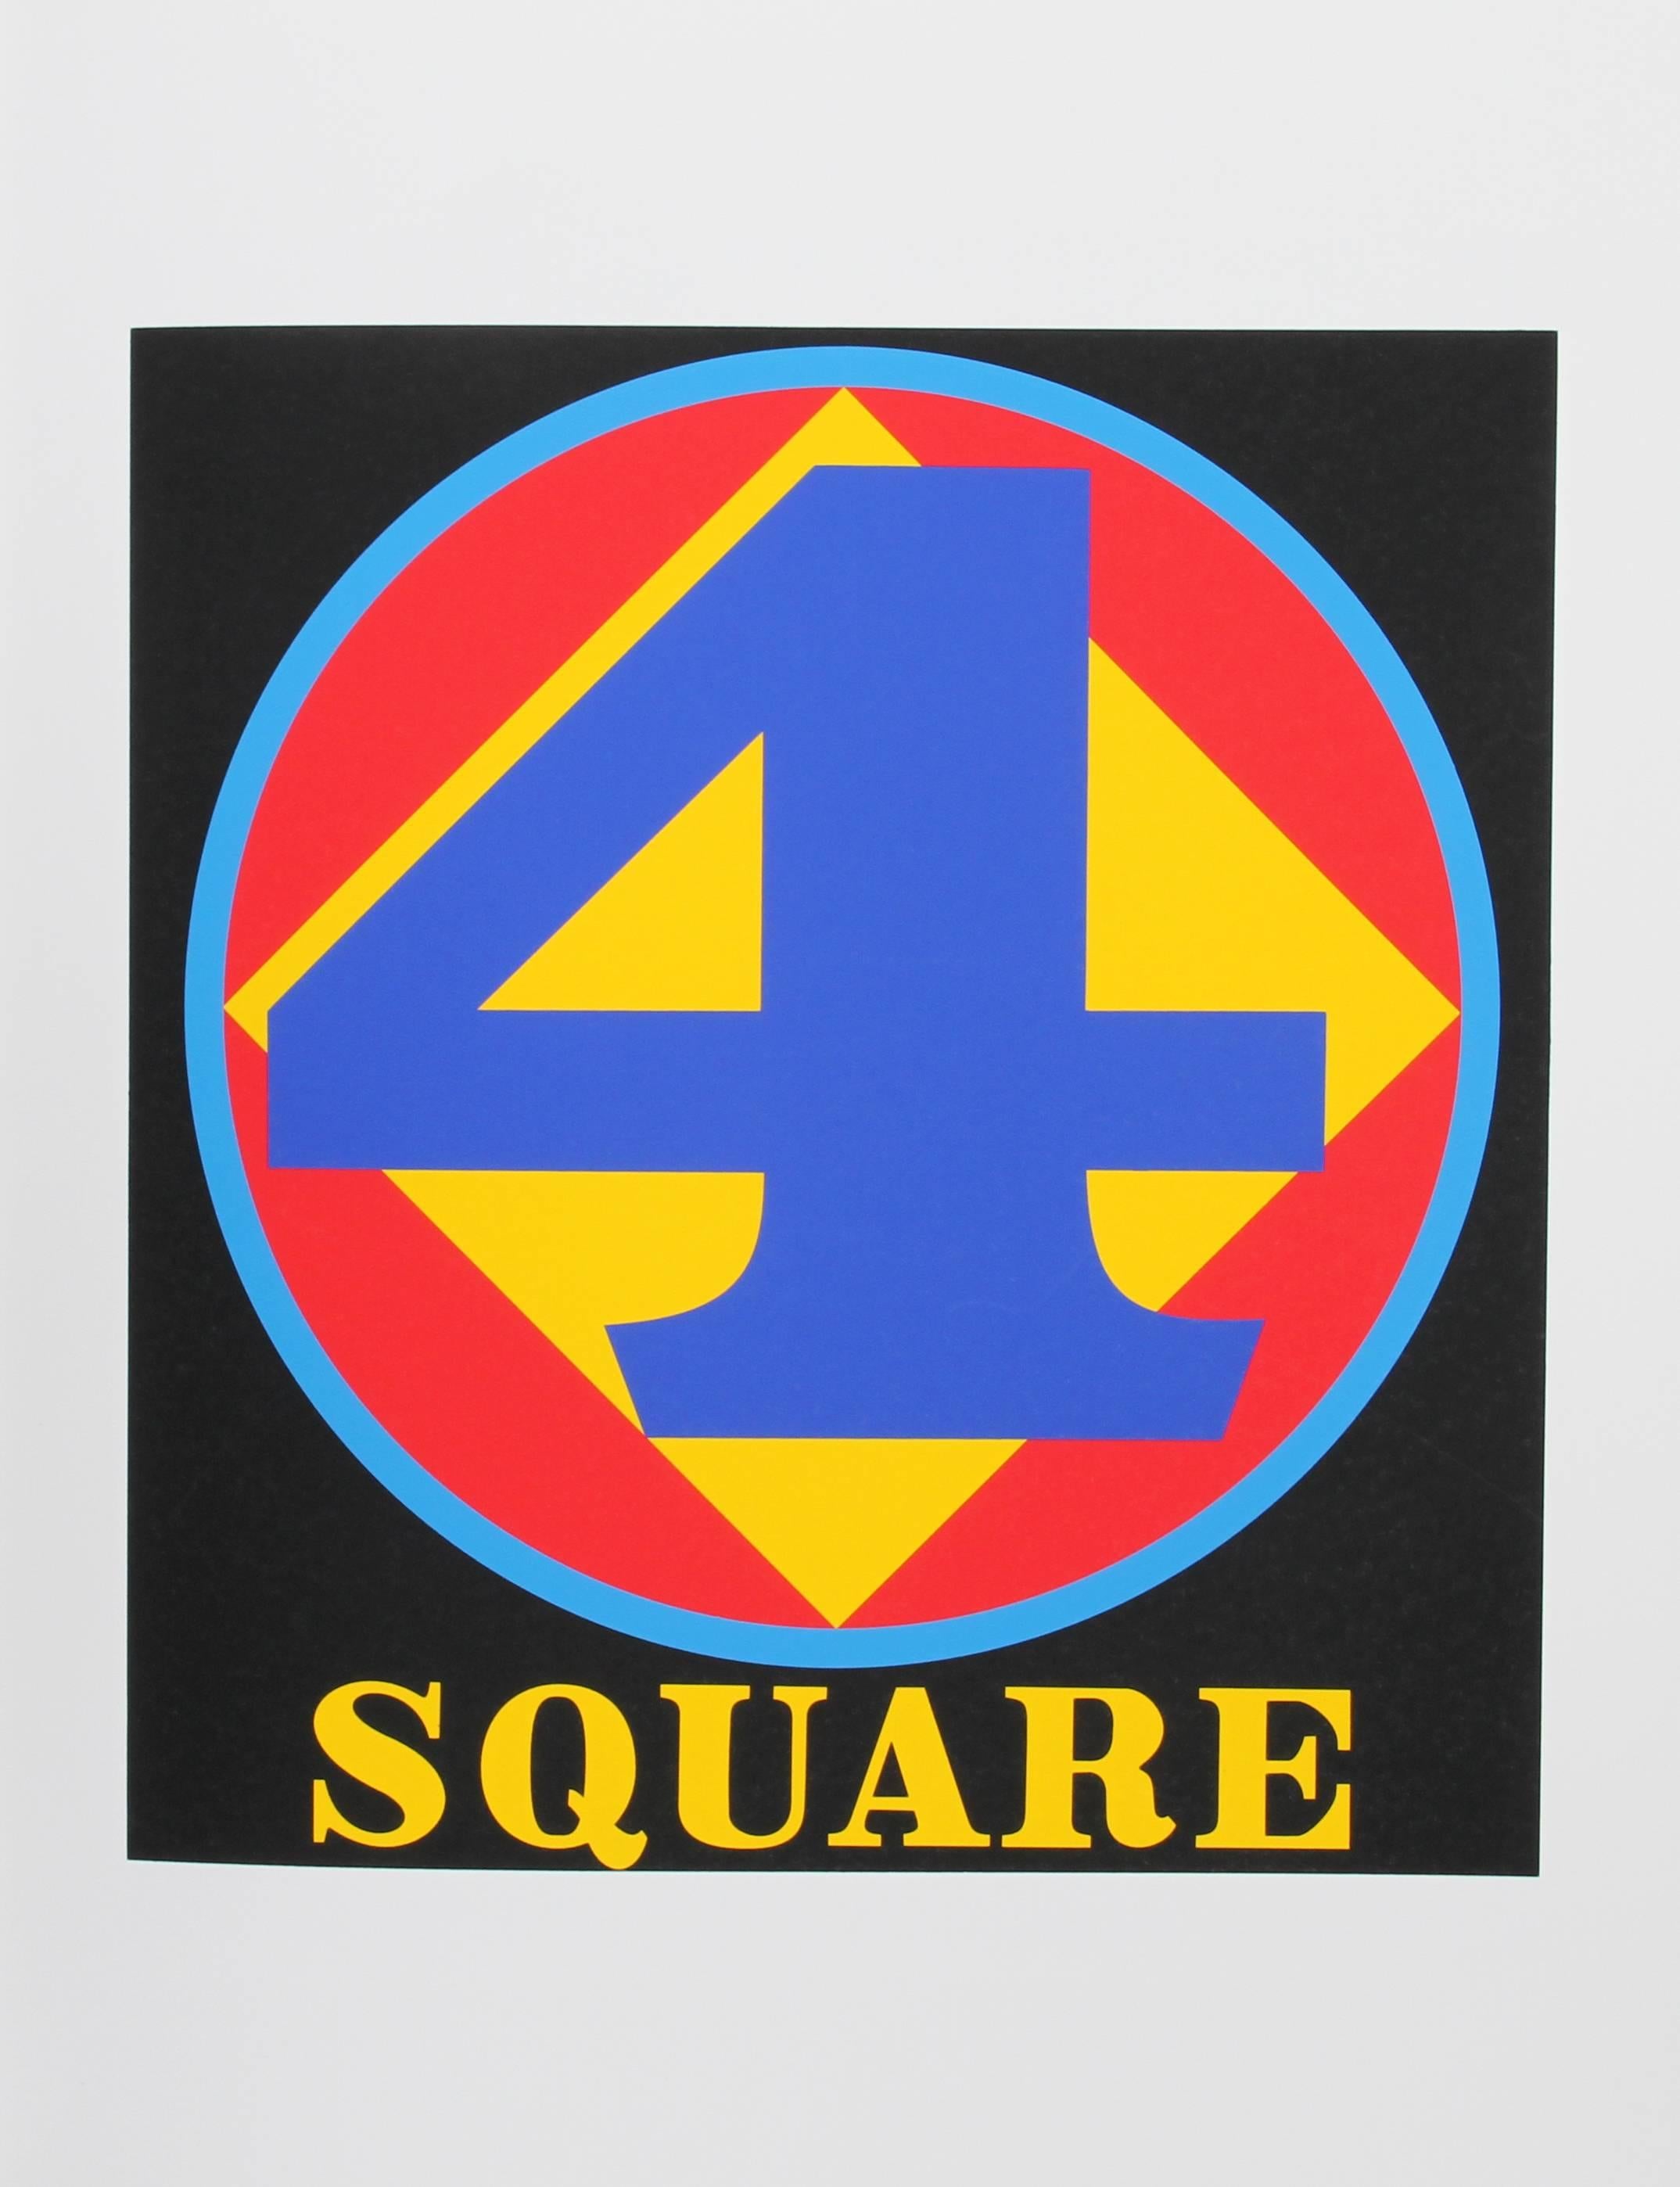 Artist: Robert Indiana, American (1928 - 2018)
Title: 4 Square from the American Dream Portfolio
Year: 1963 (1997)
Medium: Serigraph
Edition Size: 395
Image Size: 14 x 14 inches
Size: 22 in. x 17 in. (55.88 cm x 43.18 cm)

Printed and Published by